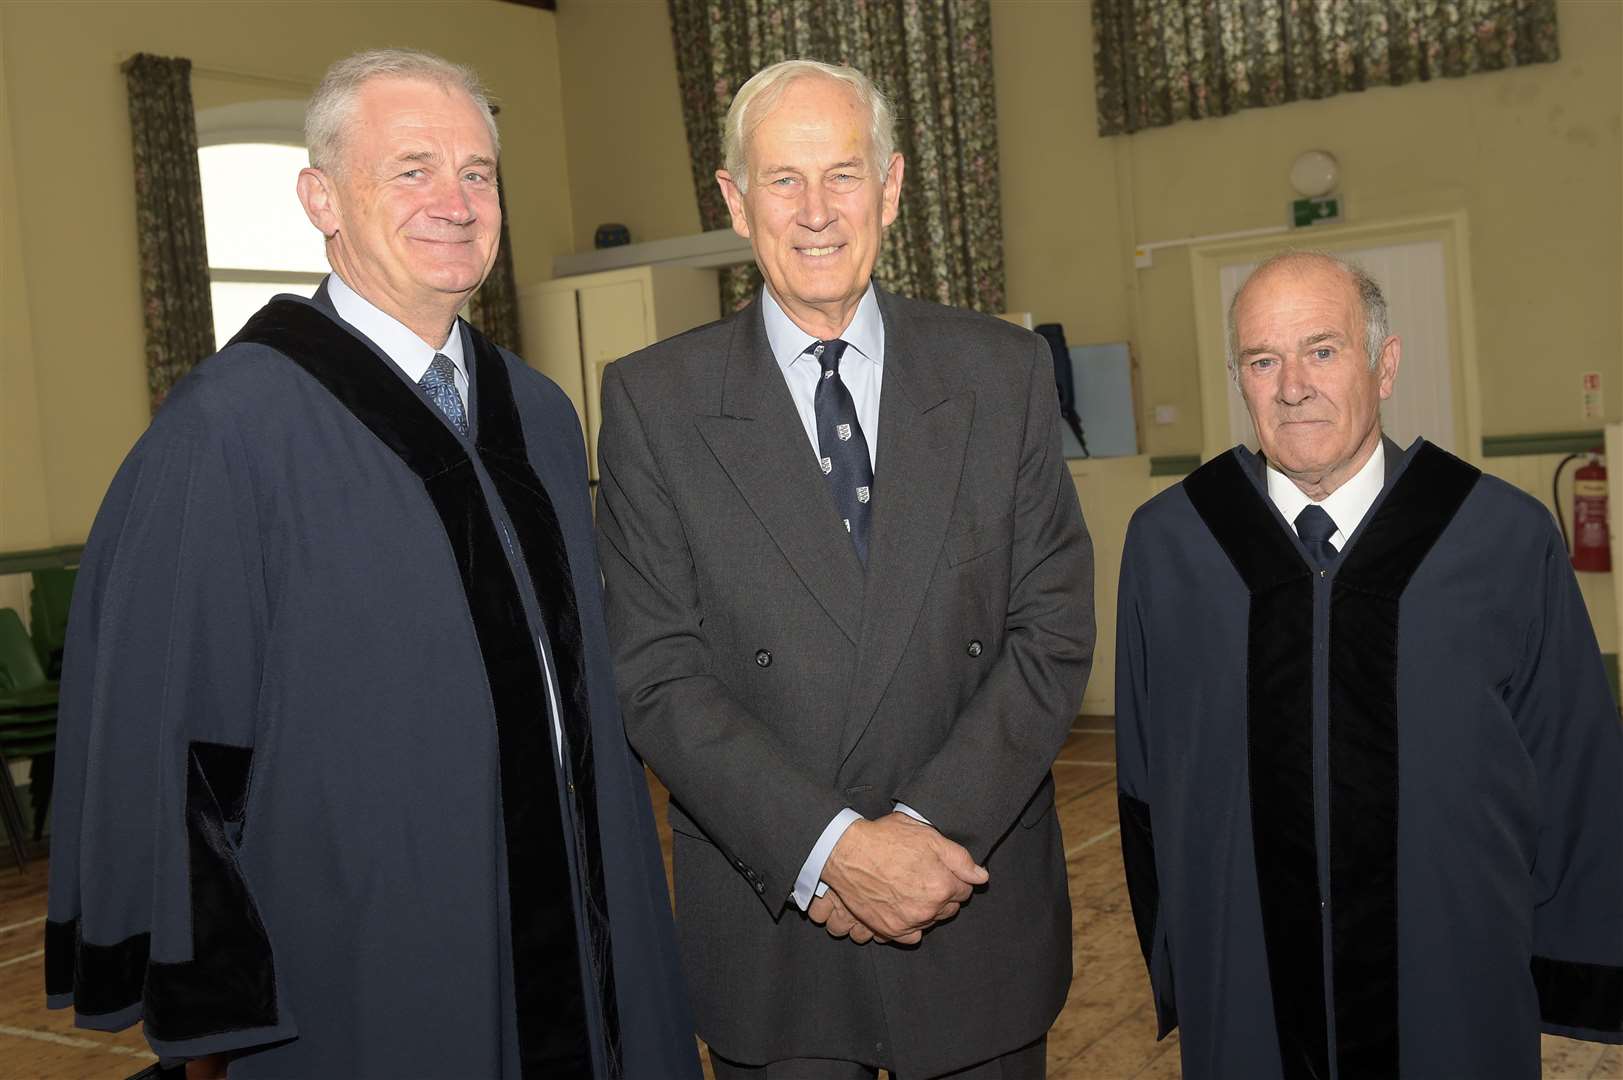 Lord Boyce (pictured in the centre) passed away on Sunday, November 6. Picture: Tony Flashman